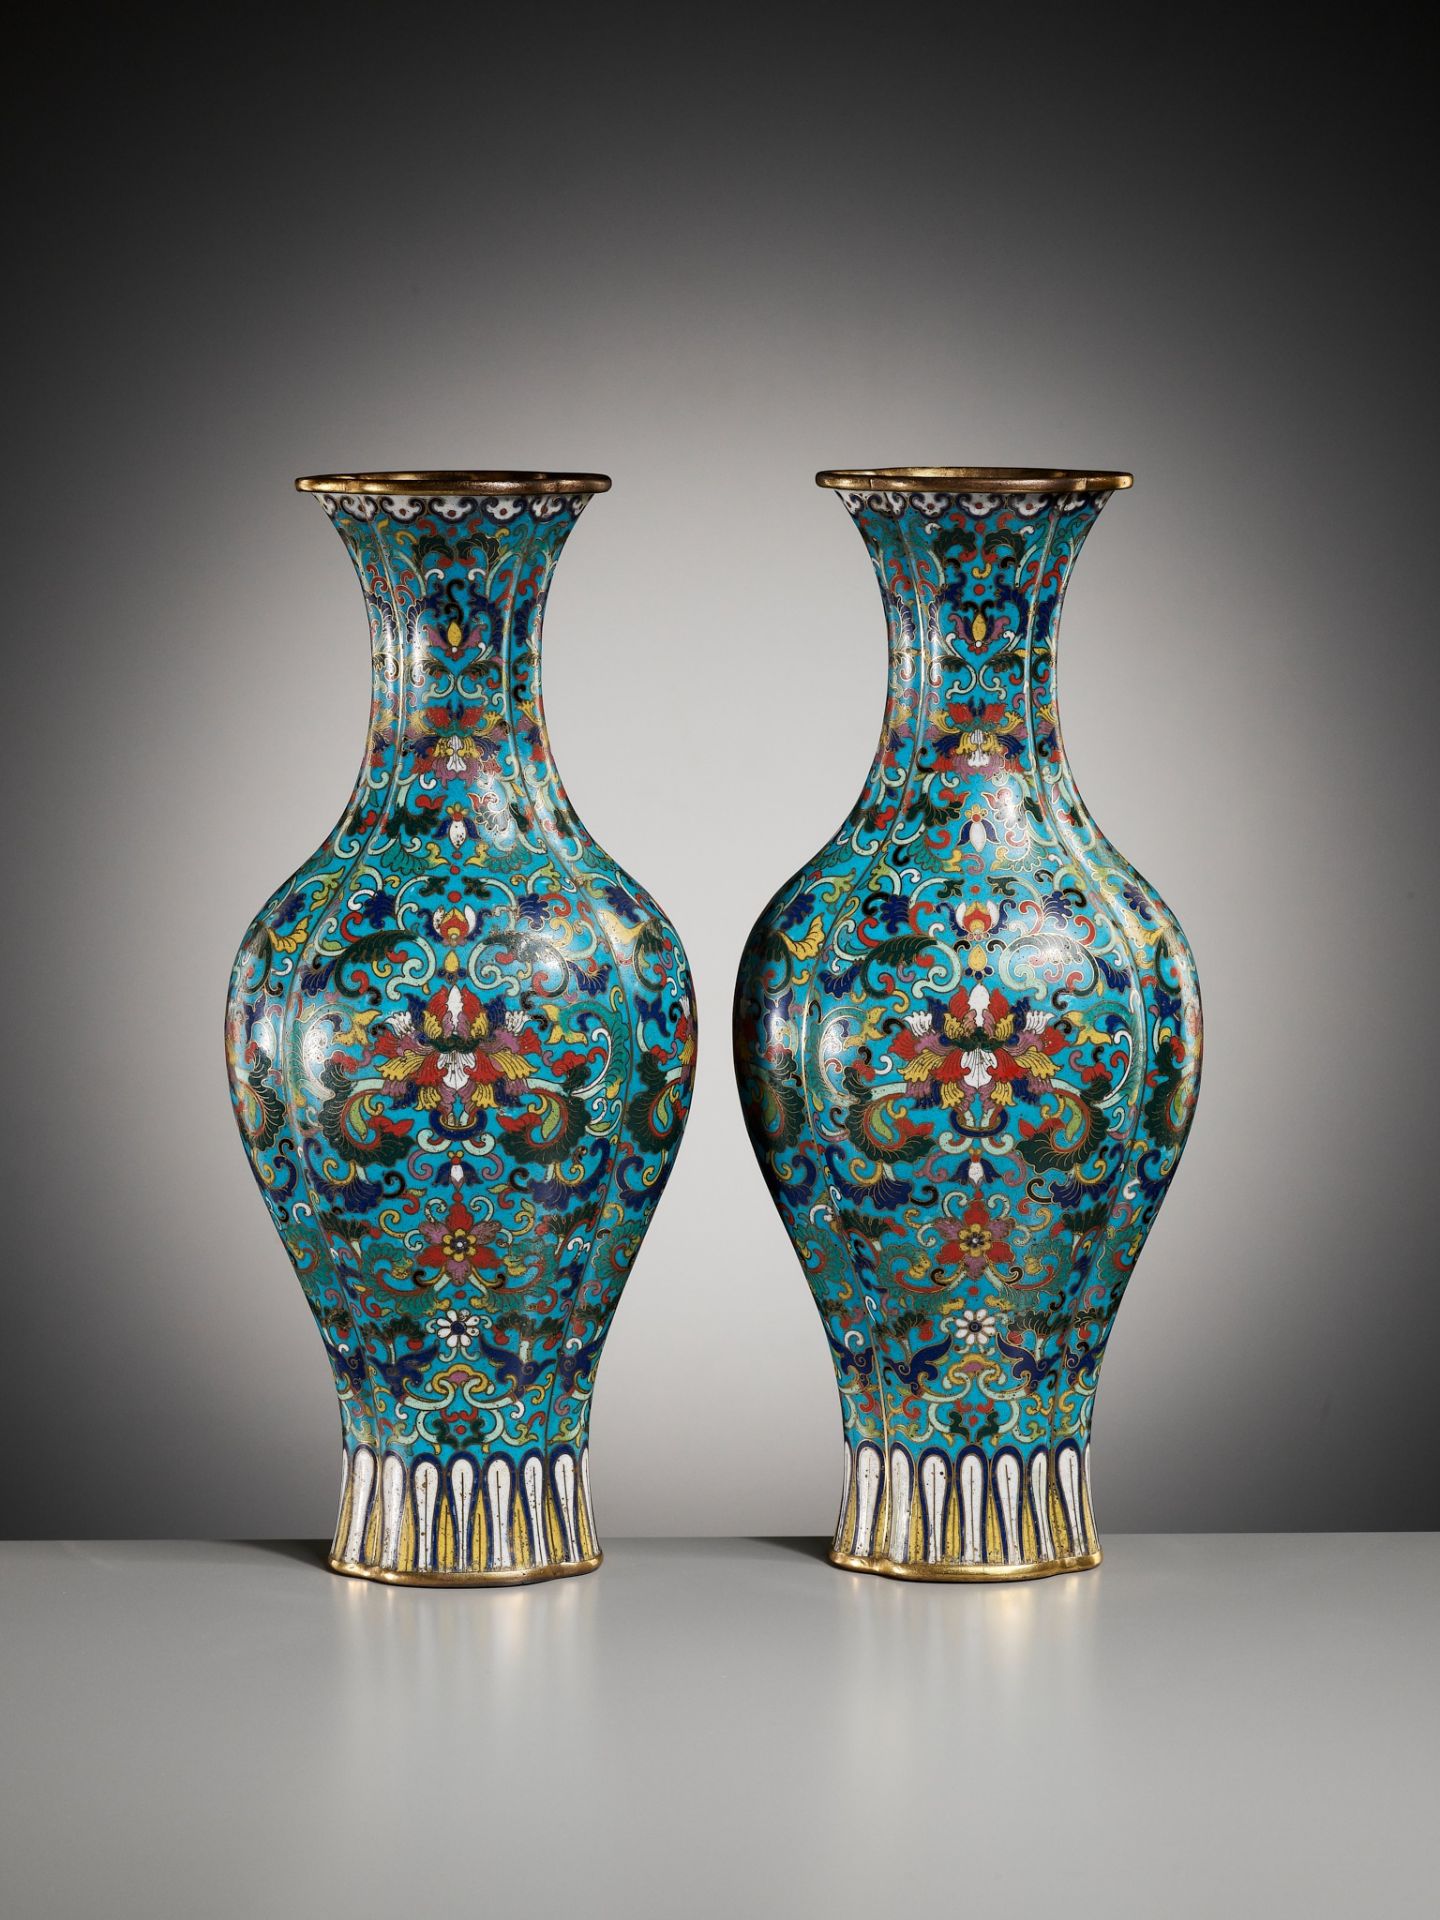 AN IMPERIAL PAIR OF QUADRILOBED CLOISONNÉ ENAMEL ‘LOTUS’ VASES, QIANLONG MARK AND OF THE PERIOD - Image 16 of 17